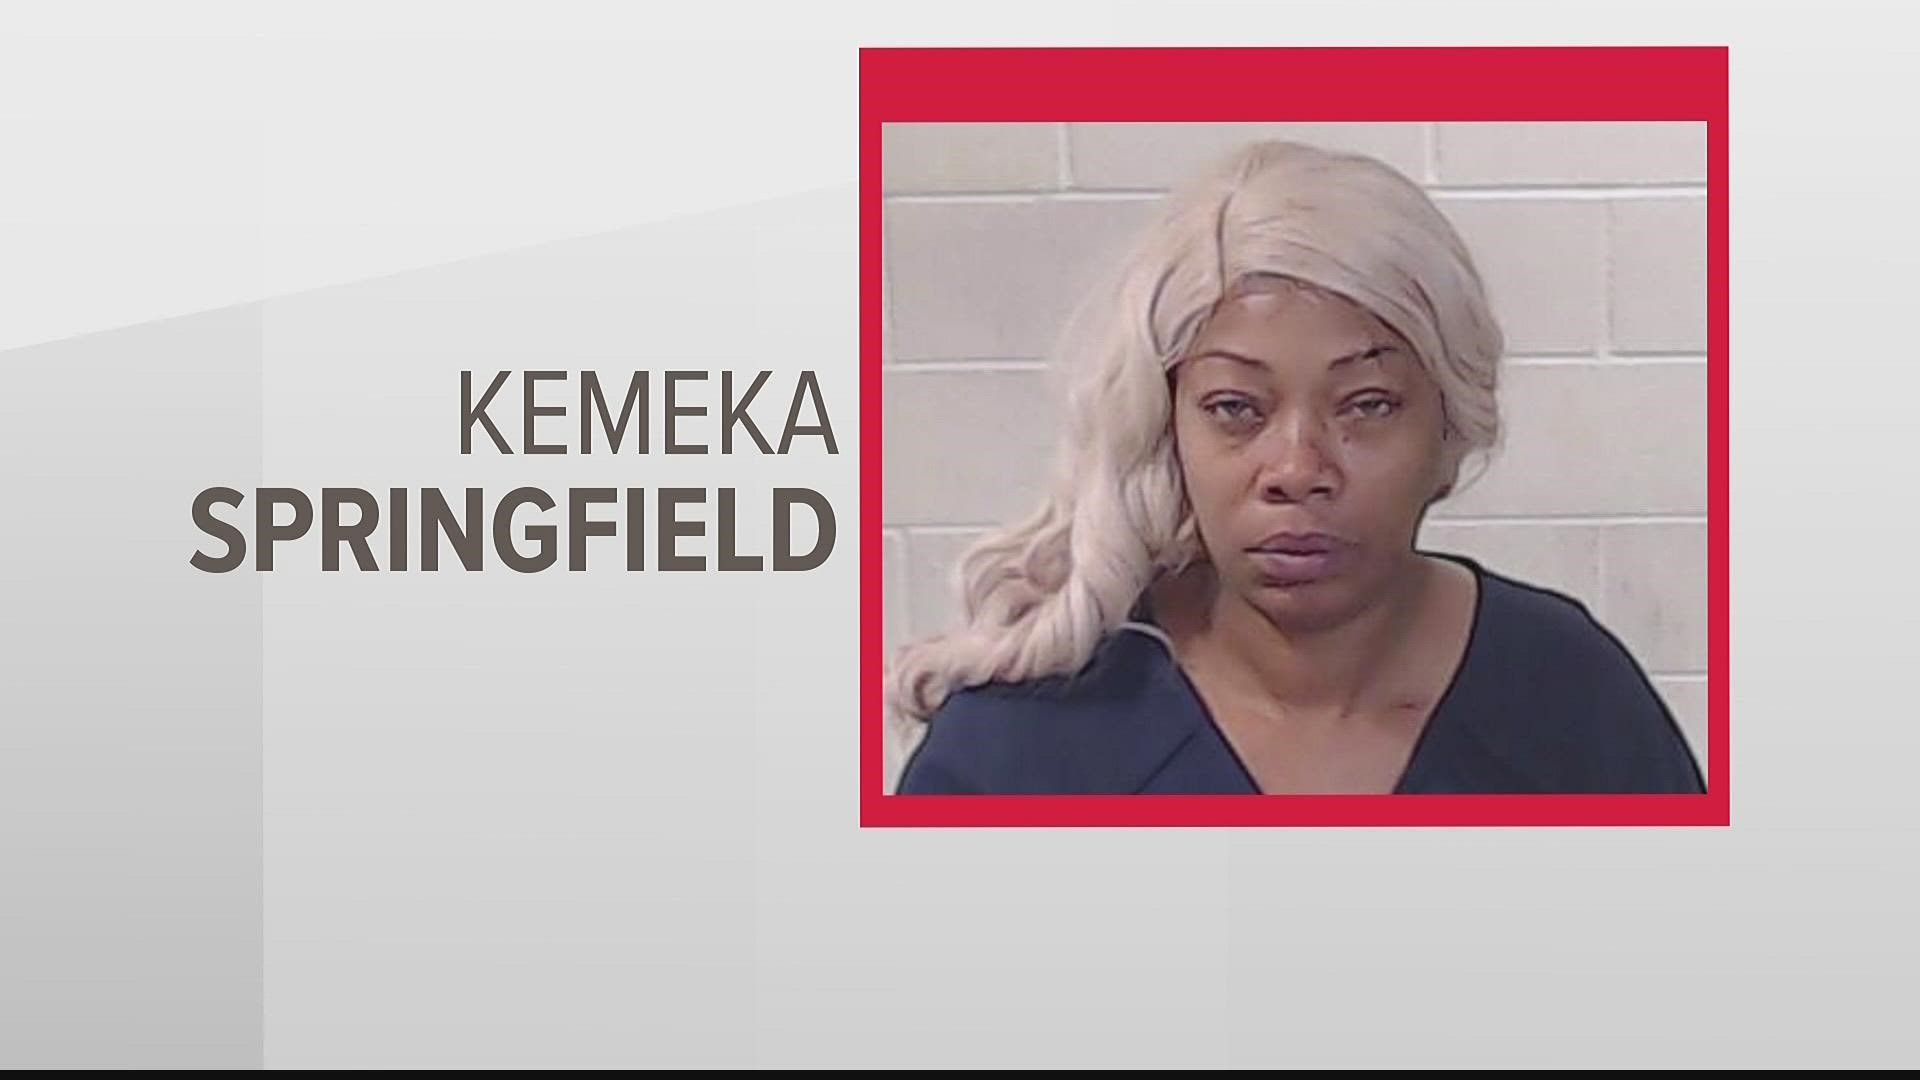 Kameka Springfield, 44, was charged with aggravated assault and possession of a firearm during the commission of a felony.